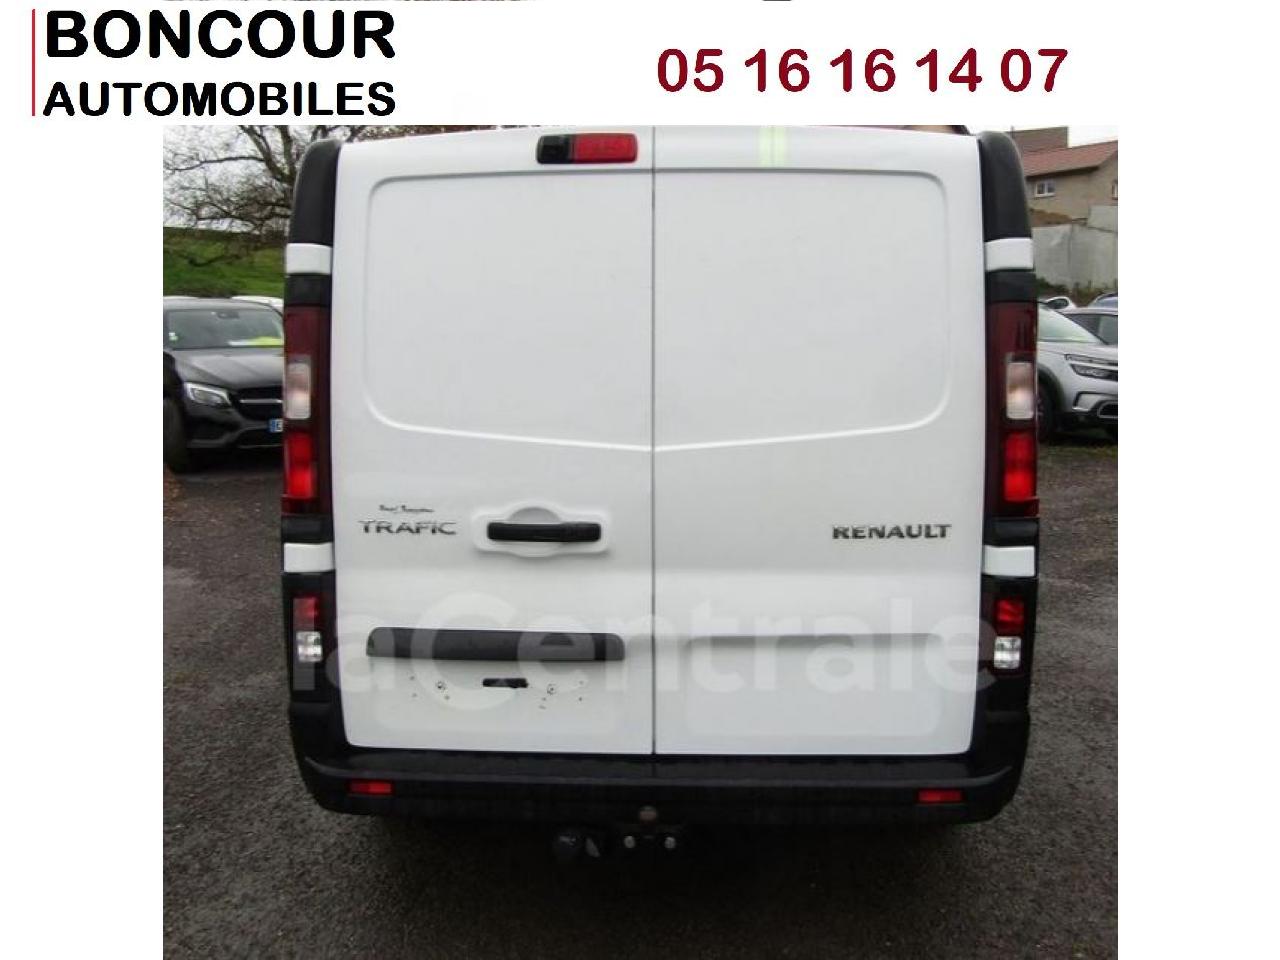 APPRO VO - RENAULT-TRAFIC-Trafic L1H1 1000 Kg 2.0 Energy dCi - 145 - BV EDC  III FOURGON Fourgon PRO+ L1H1 PHASE 2